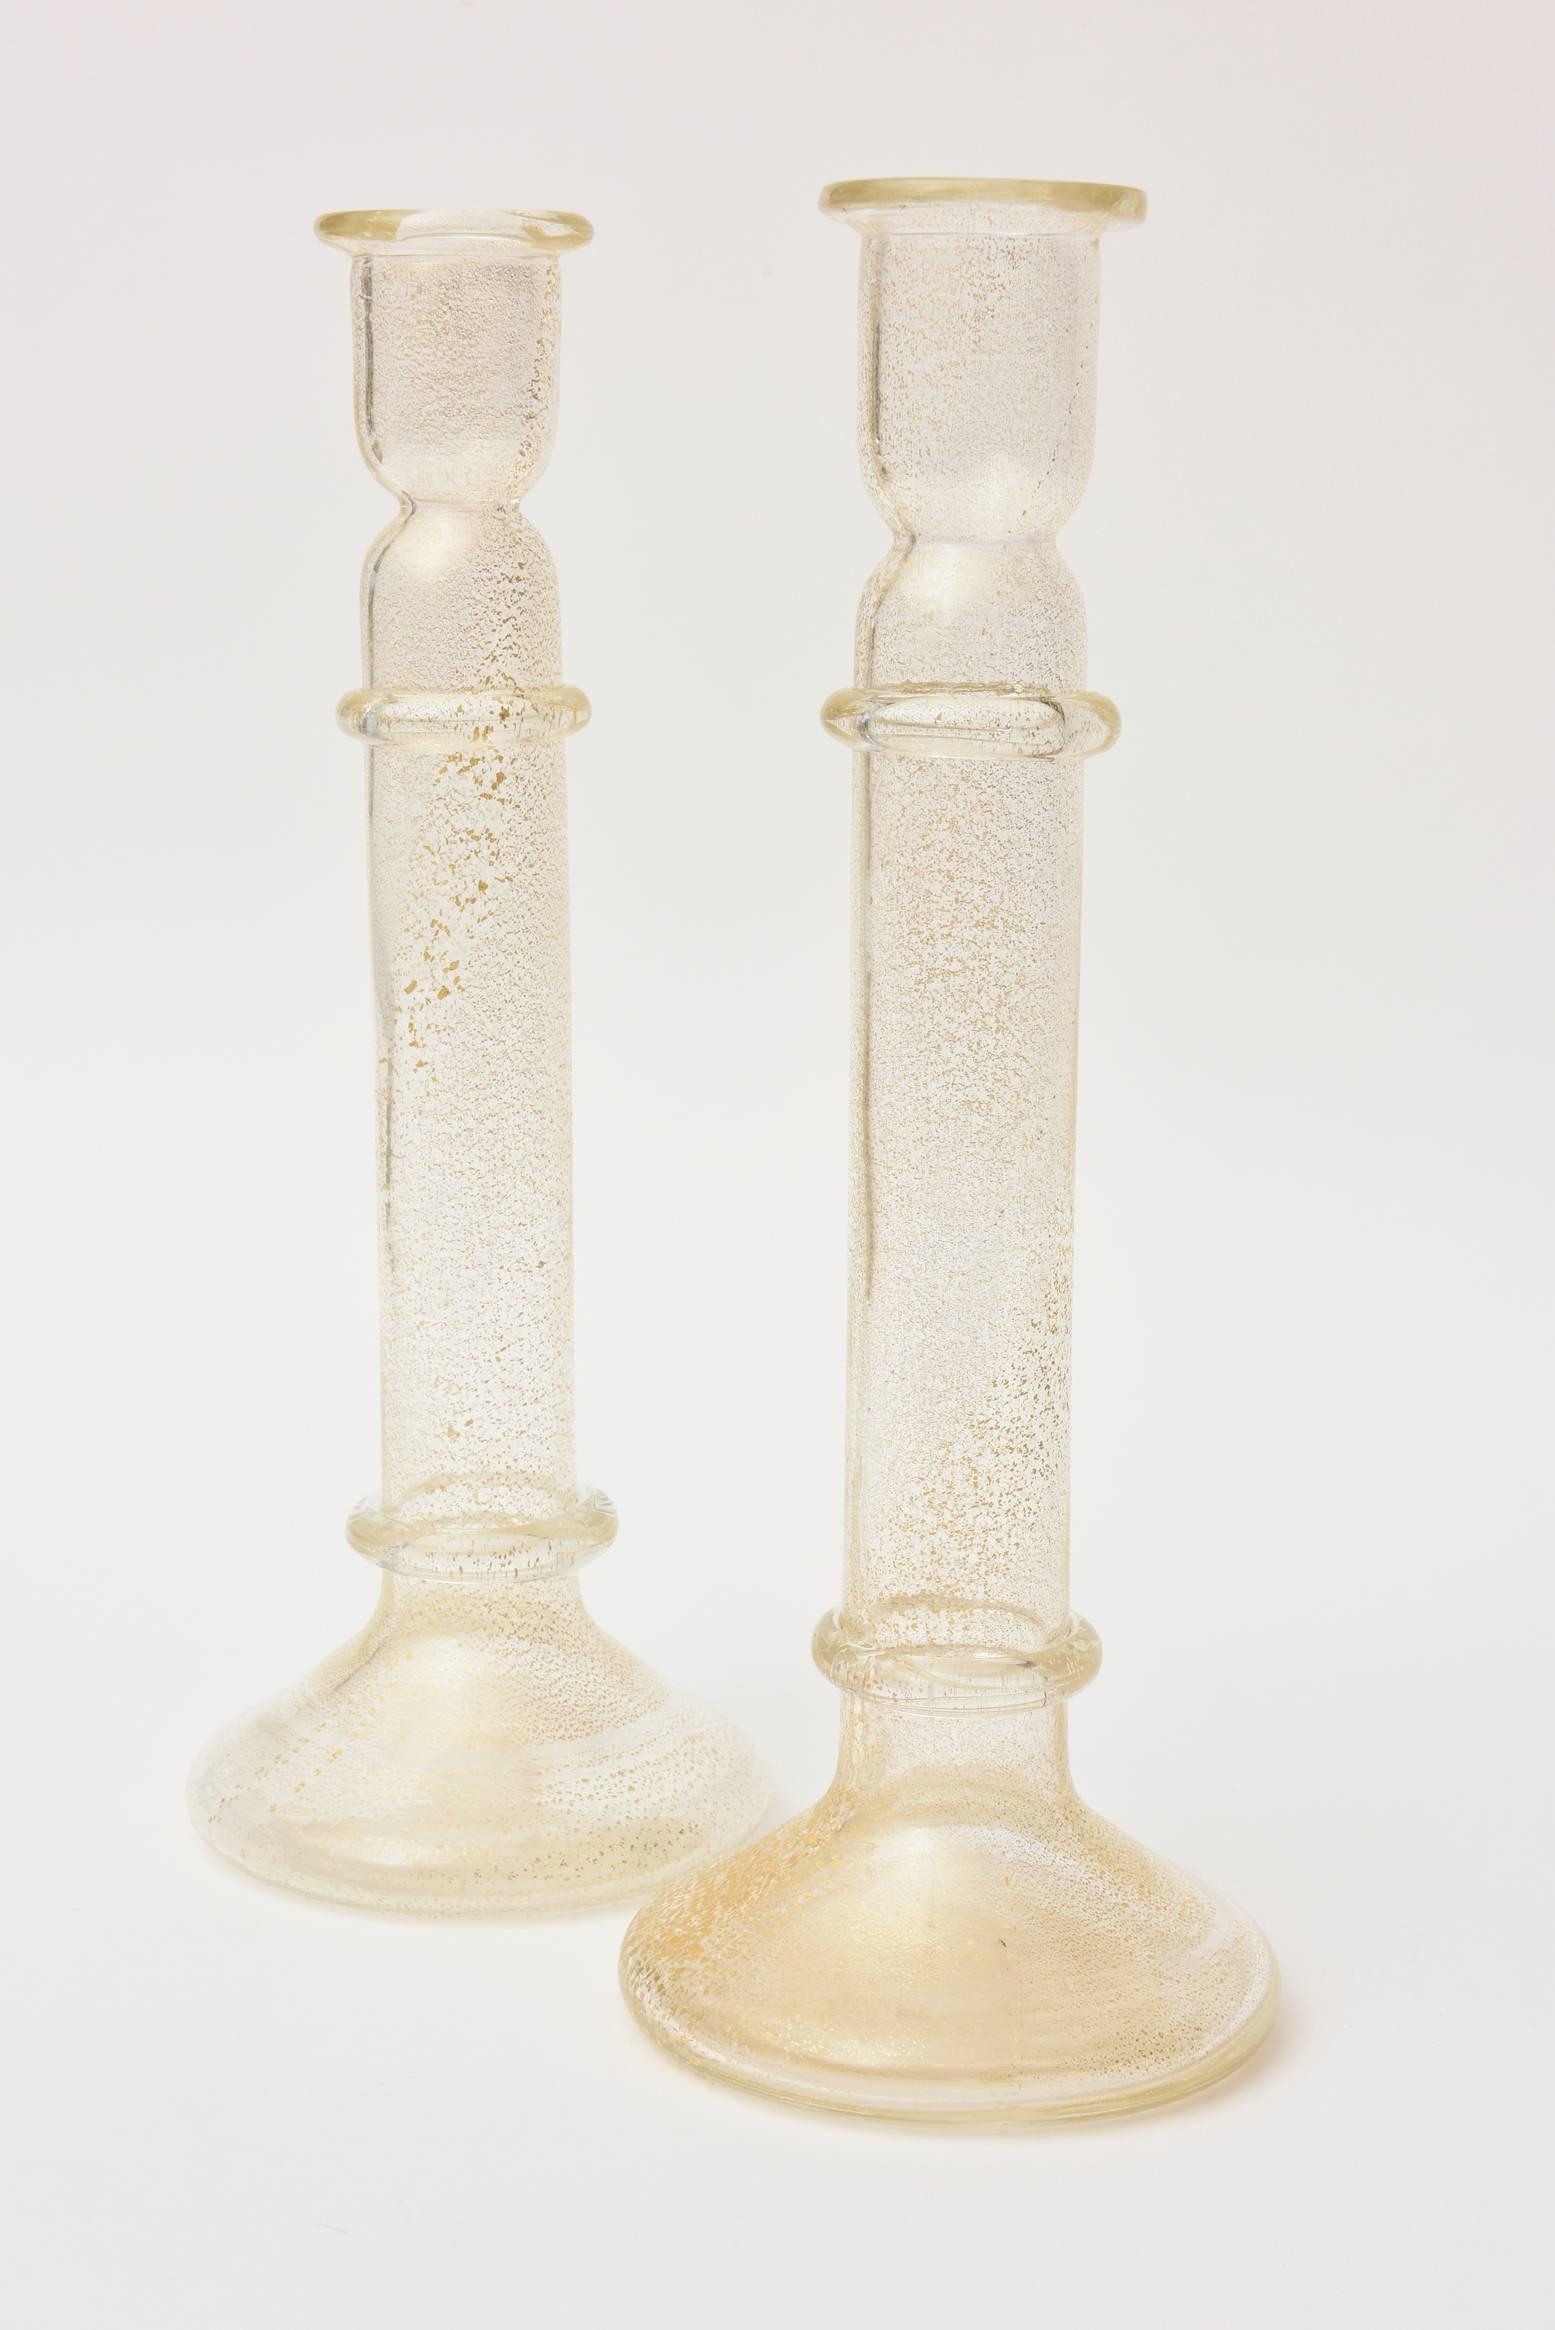 These stunning pair of Murano Barovier e Toso glass candlesticks have abundant gold aventurine interspersed throughout. They are classic and timeless.
The photos do not do justice to the beauty and simple elegance of these Murano